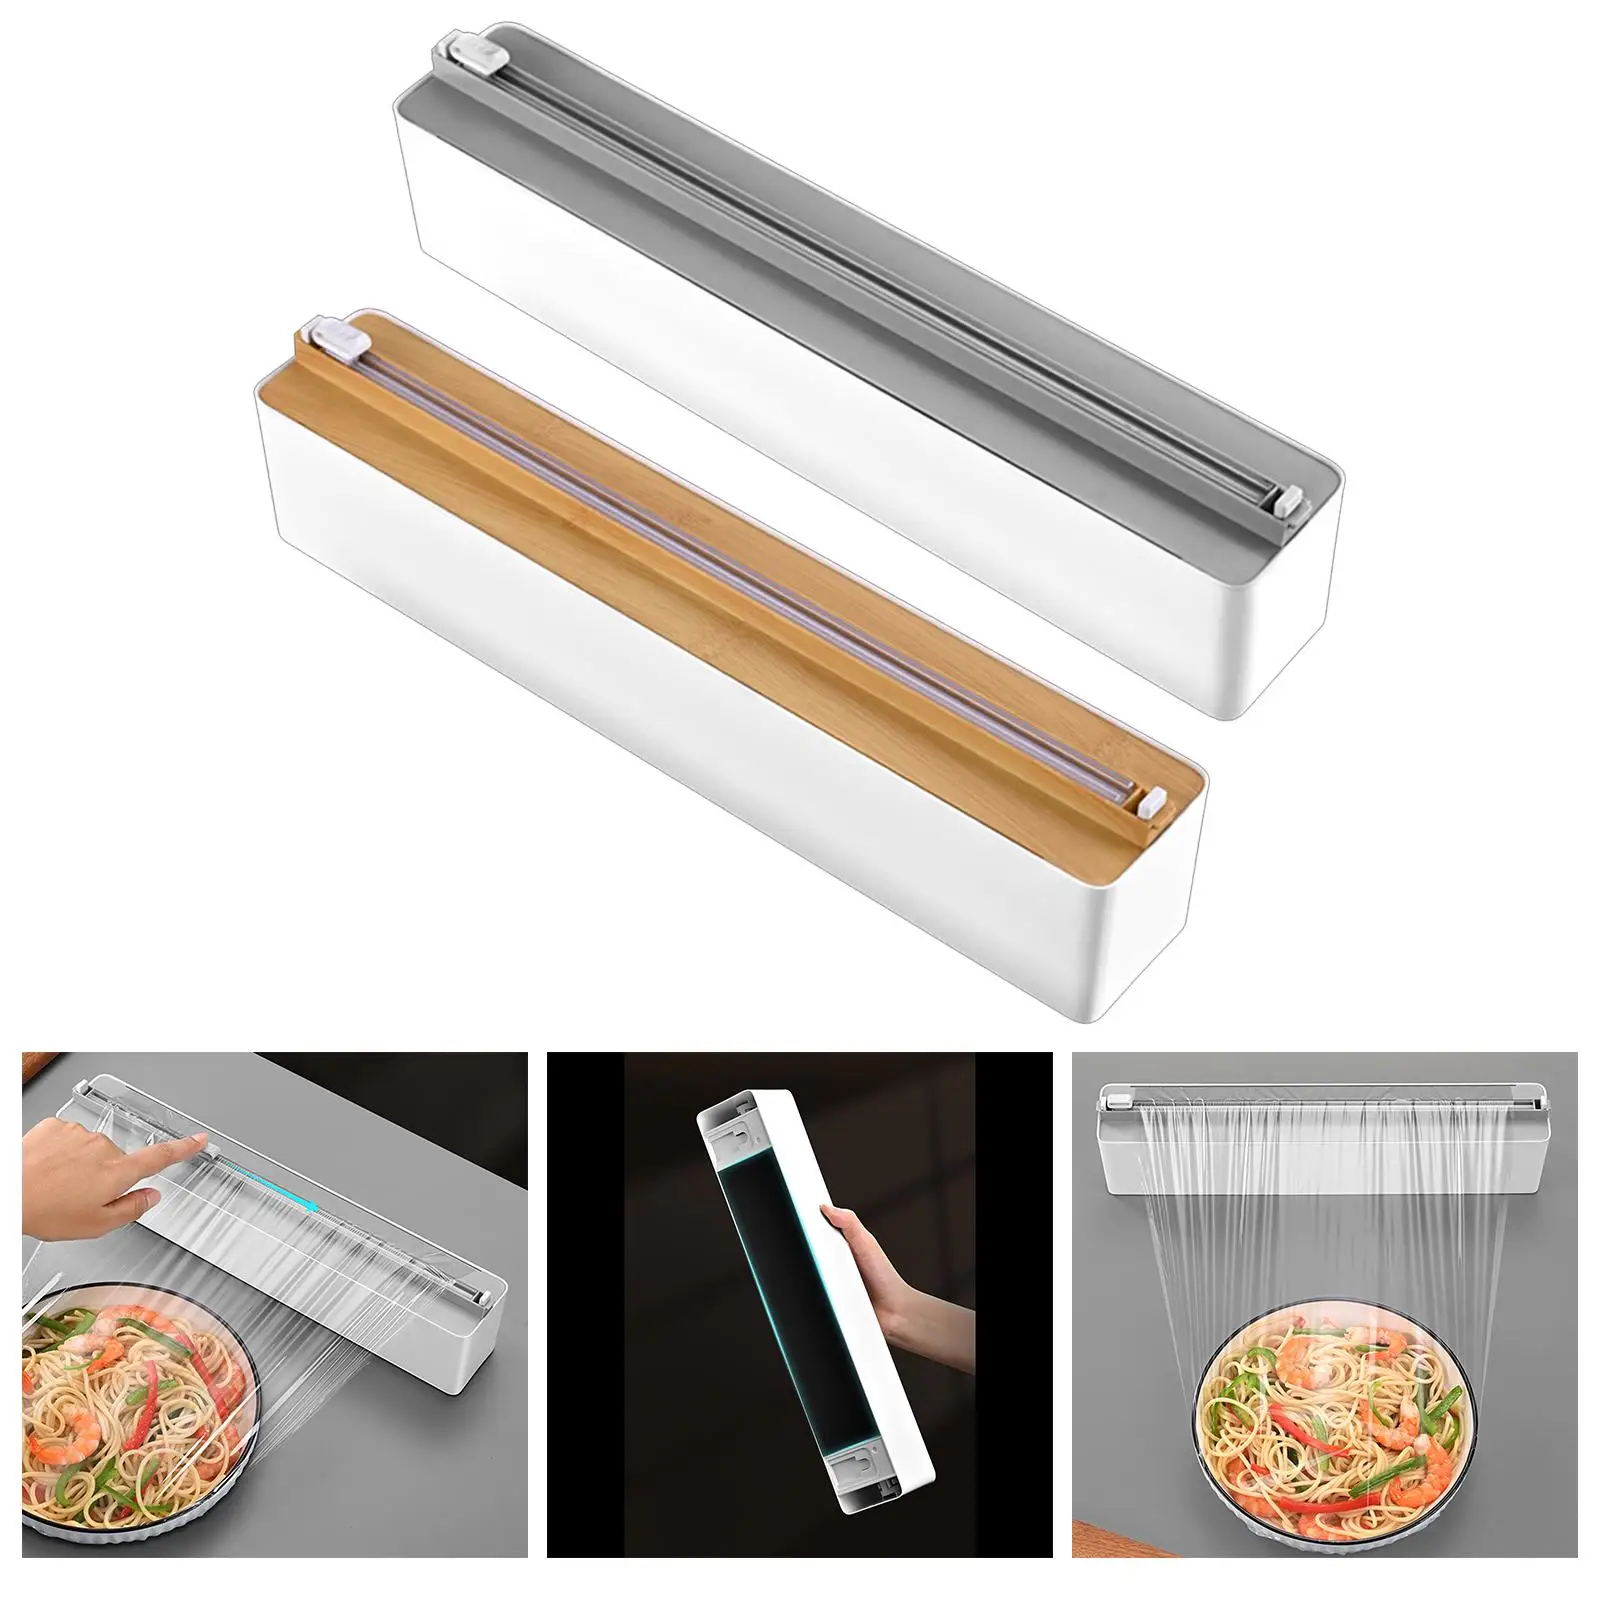 Refillable Cling Film Cutting Box Safety Household Food Wrap Dispenser for Home